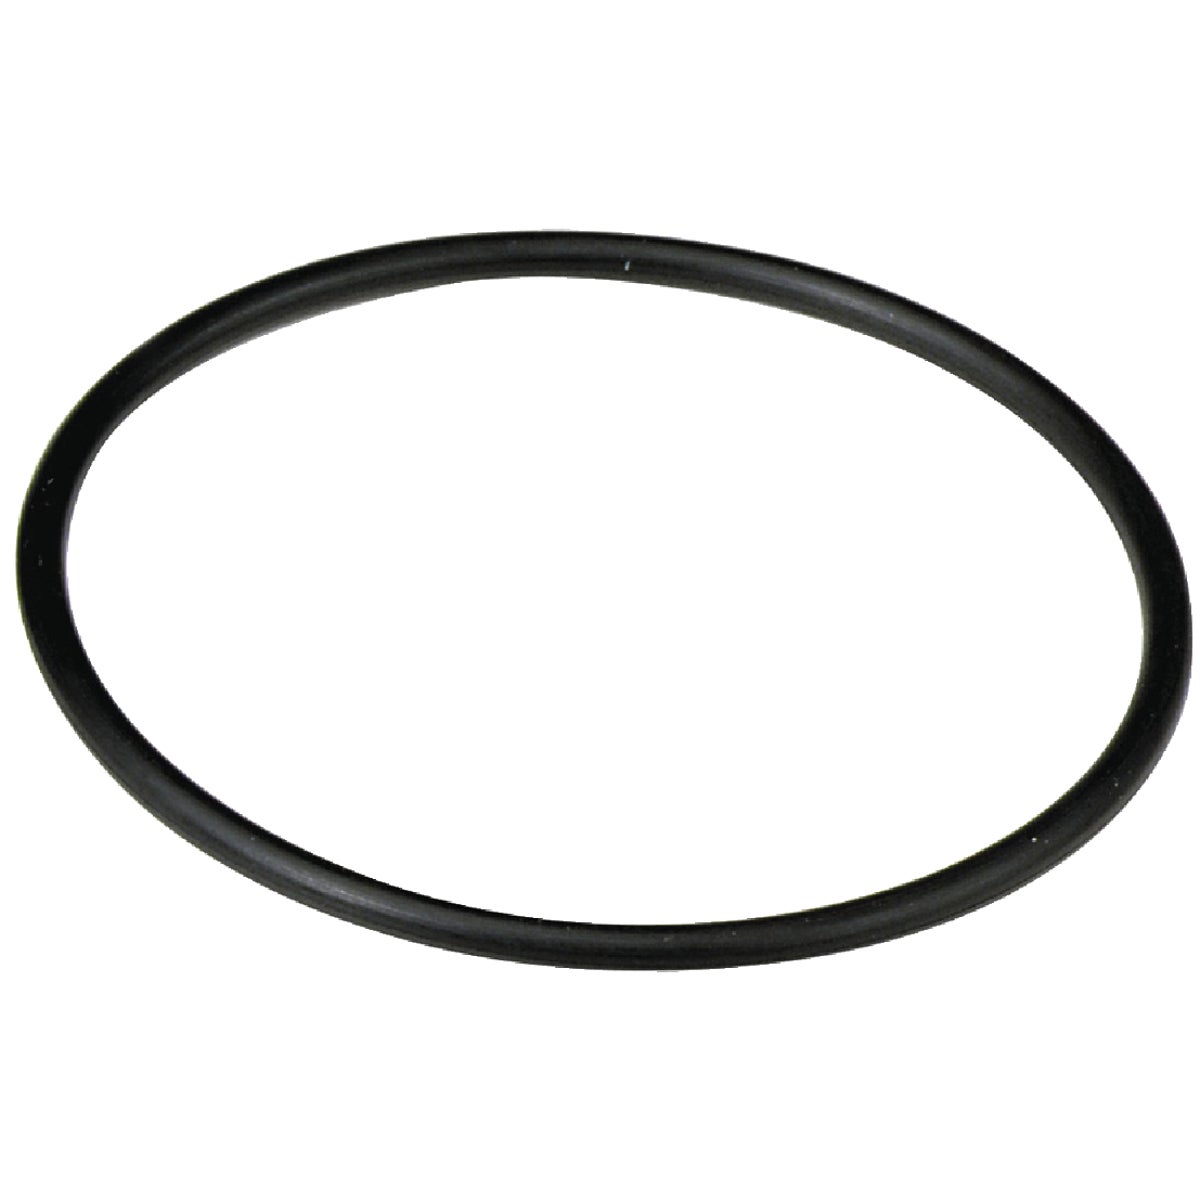 Item 411310, Replacement O-ring for Culligan model No.